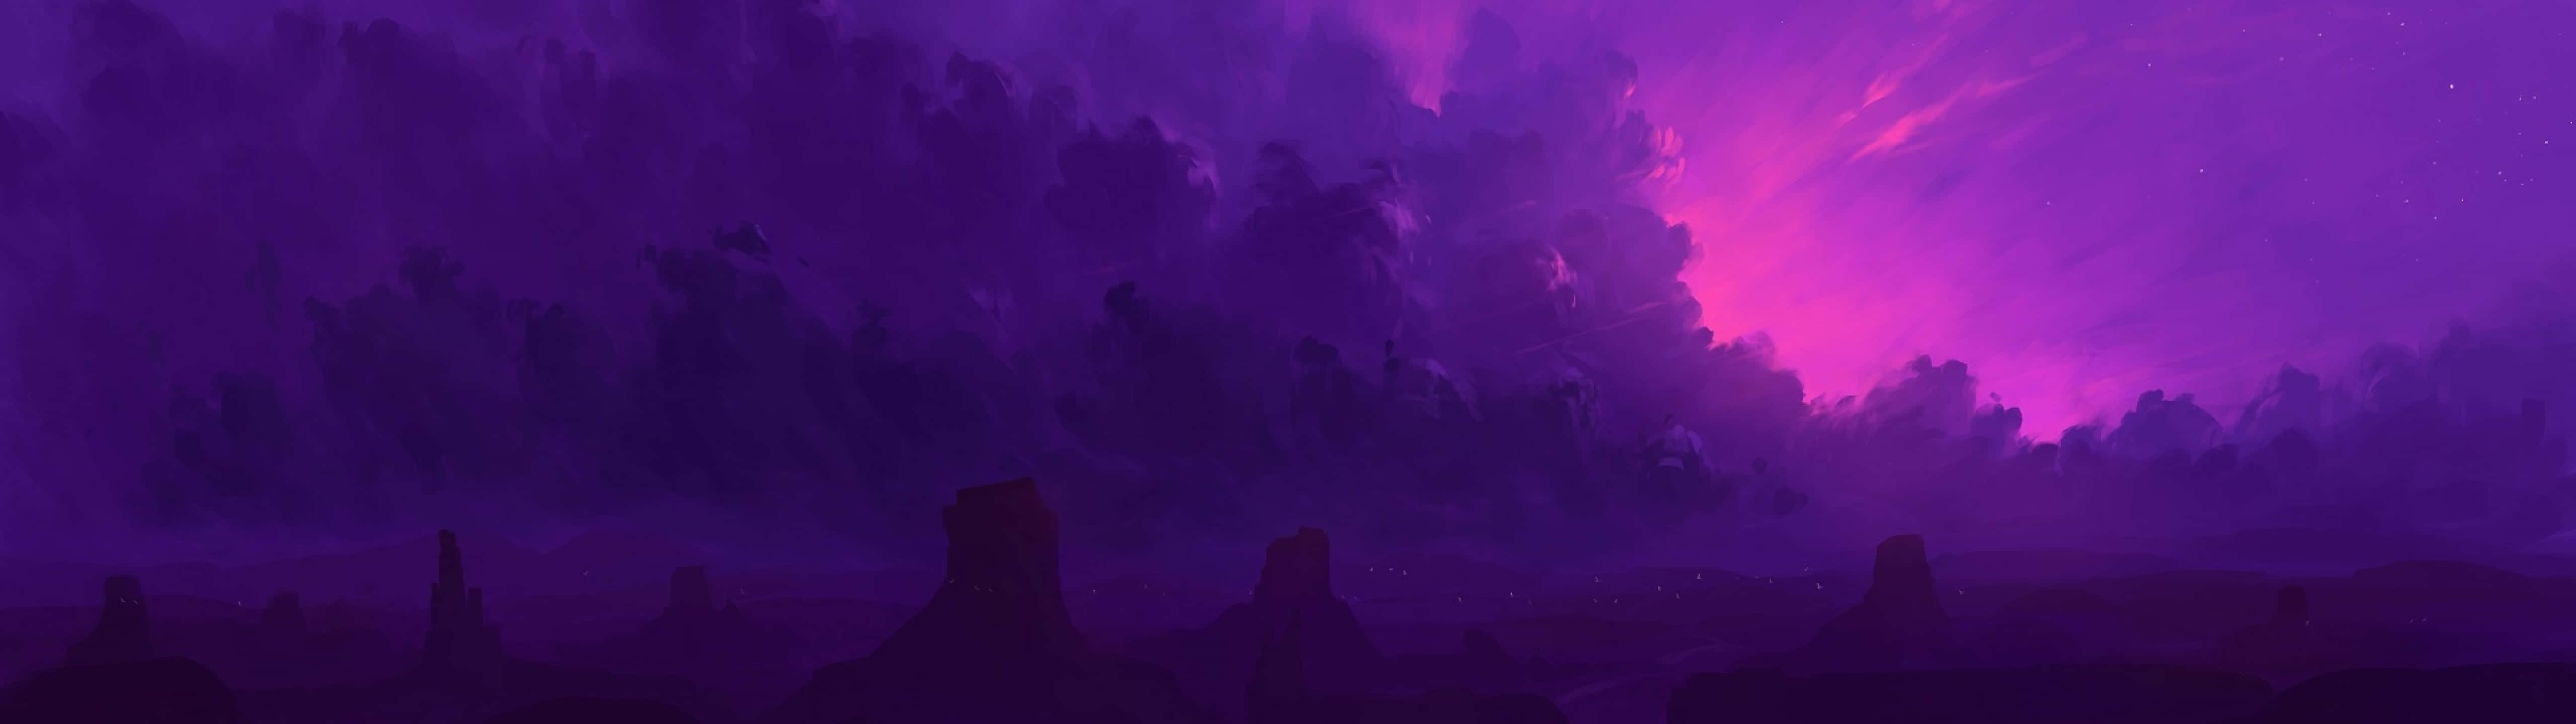 A purple and pink sky with a mountain range in the distance - 5120x1440